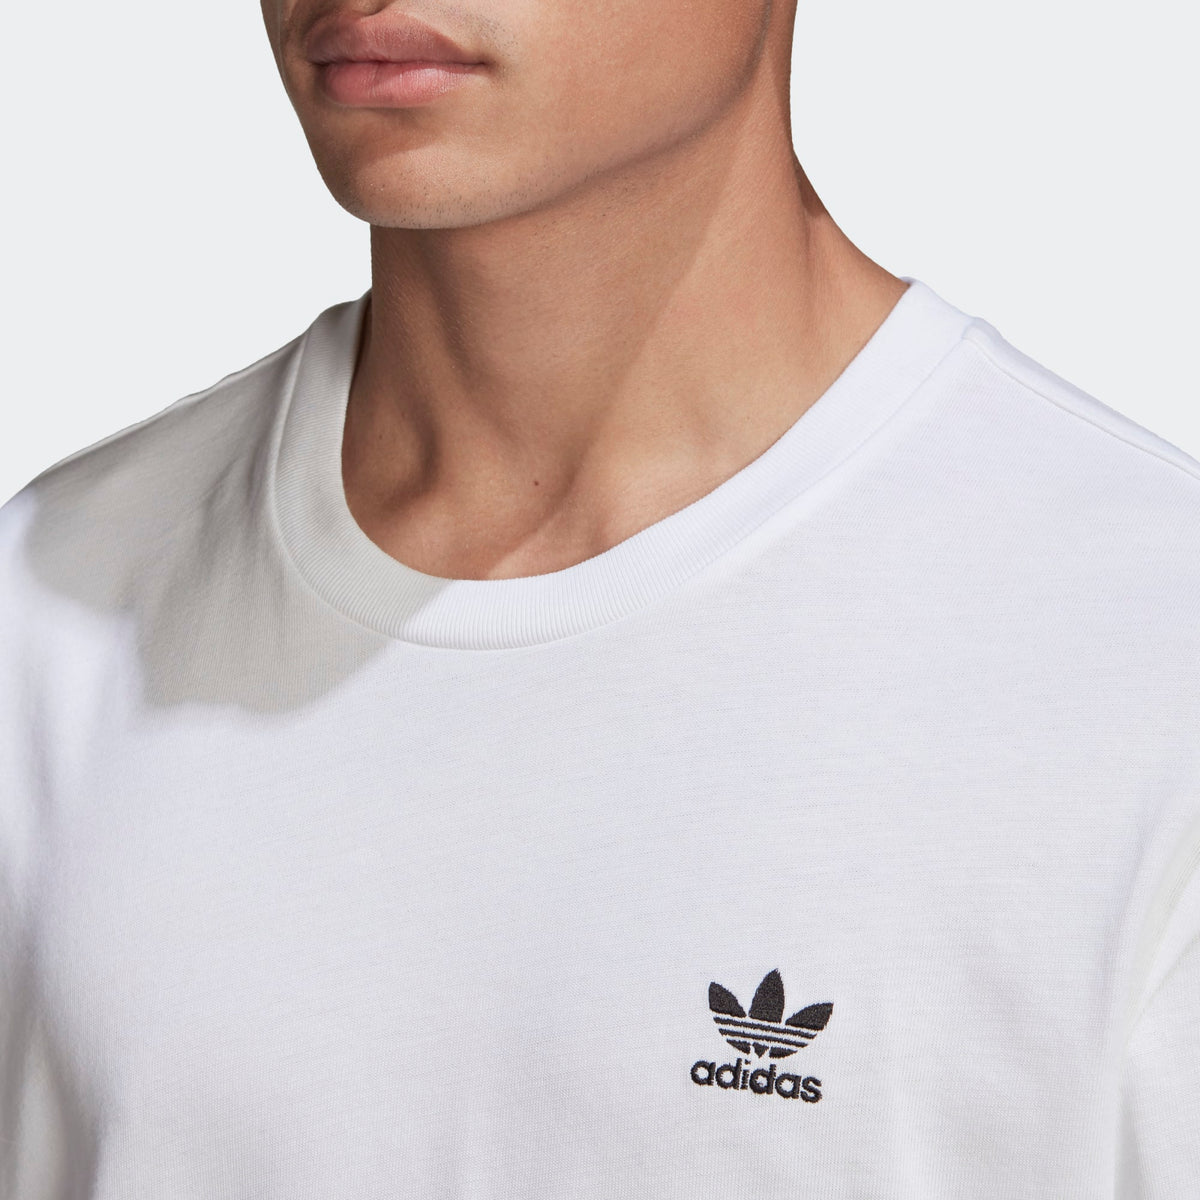 Classics – Tee Trilogy Logo Adicolor PH Boxy Merch Adidas (White)(GN3453) Embroidered